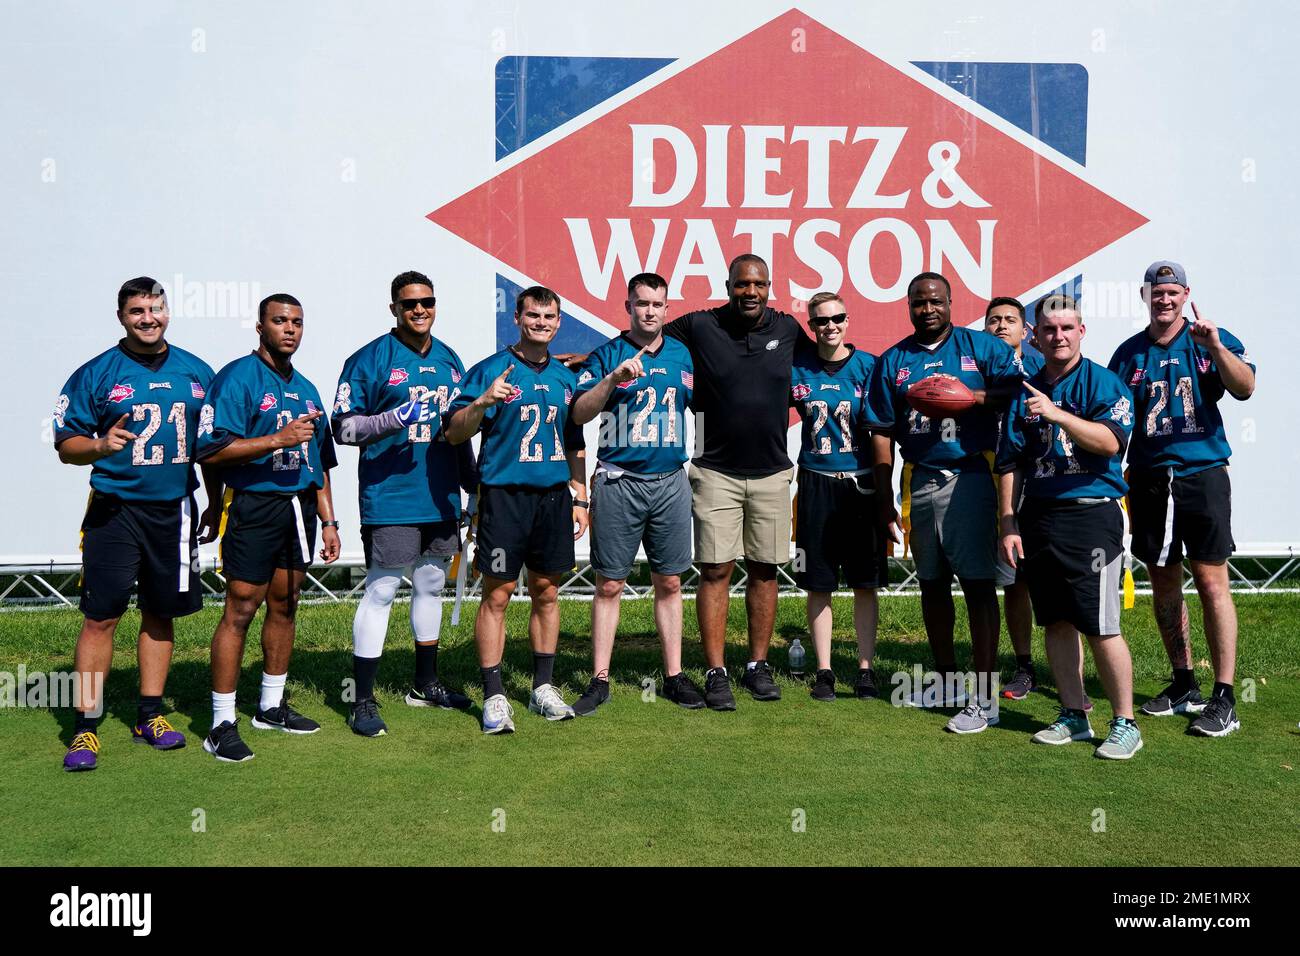 Philadelphia Eagles Alum William Thomas, center, poses with his team of  members of the US military after playing a game of flag football on the  field for the 'Back Together Saturday' during